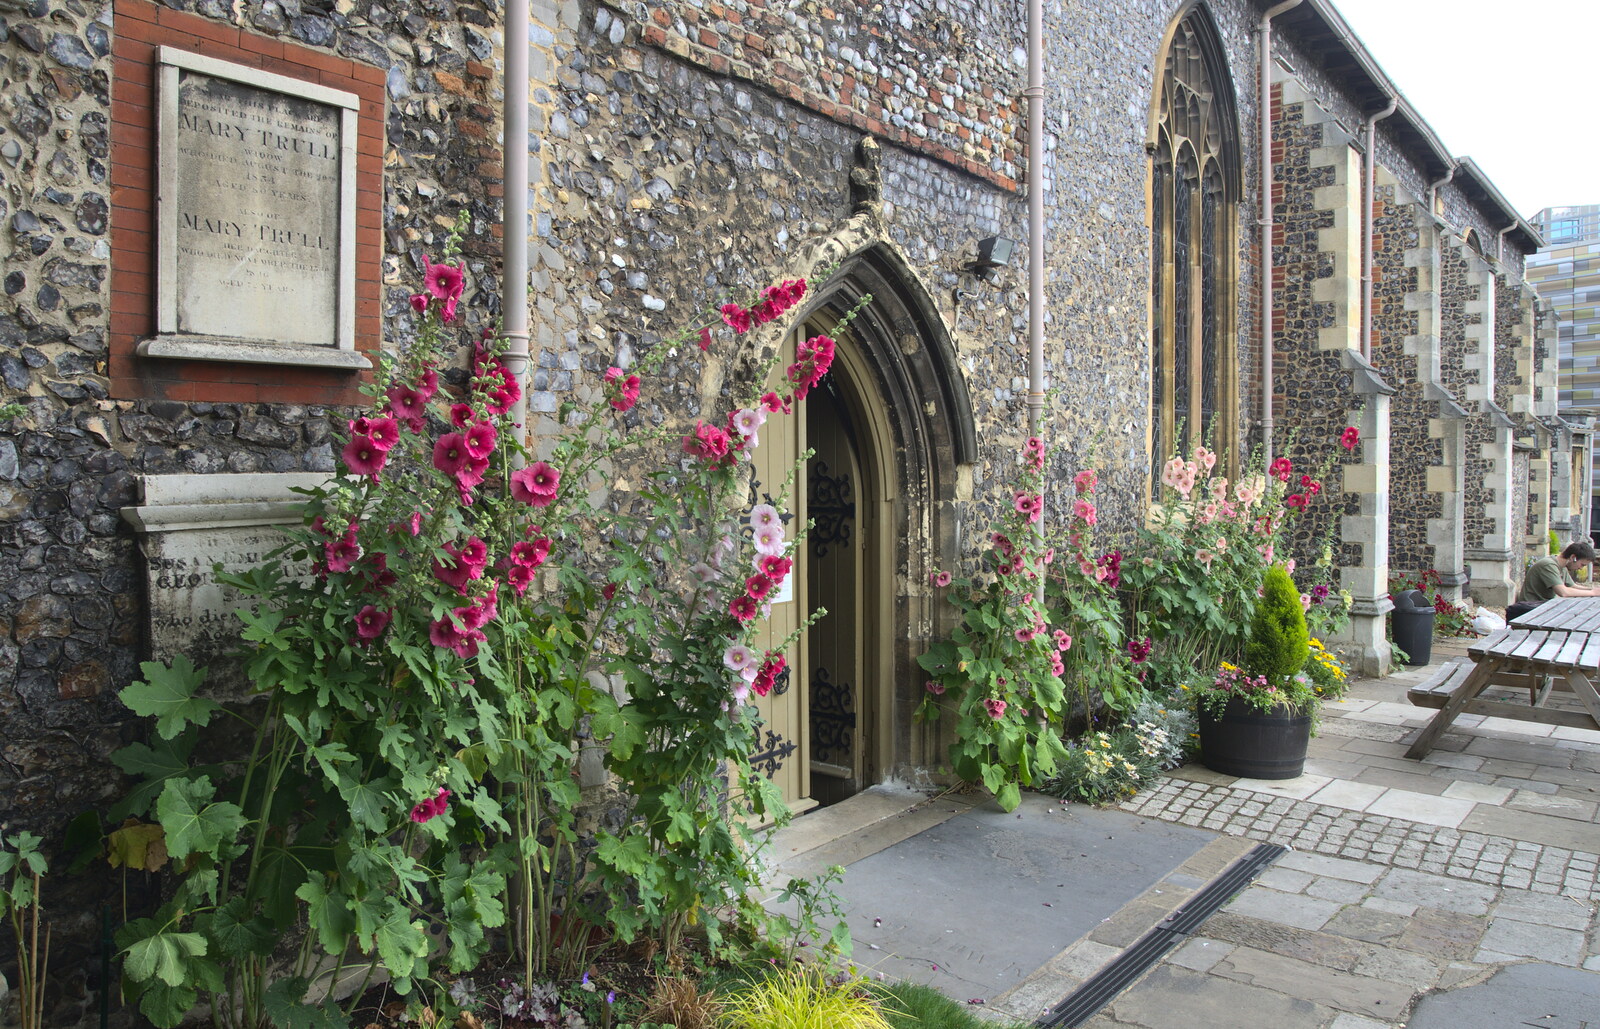 Nice flowers outside St Stephen's Church from Isobel's Choral Flash Mob, Norwich, Norfolk - 17th June 2017